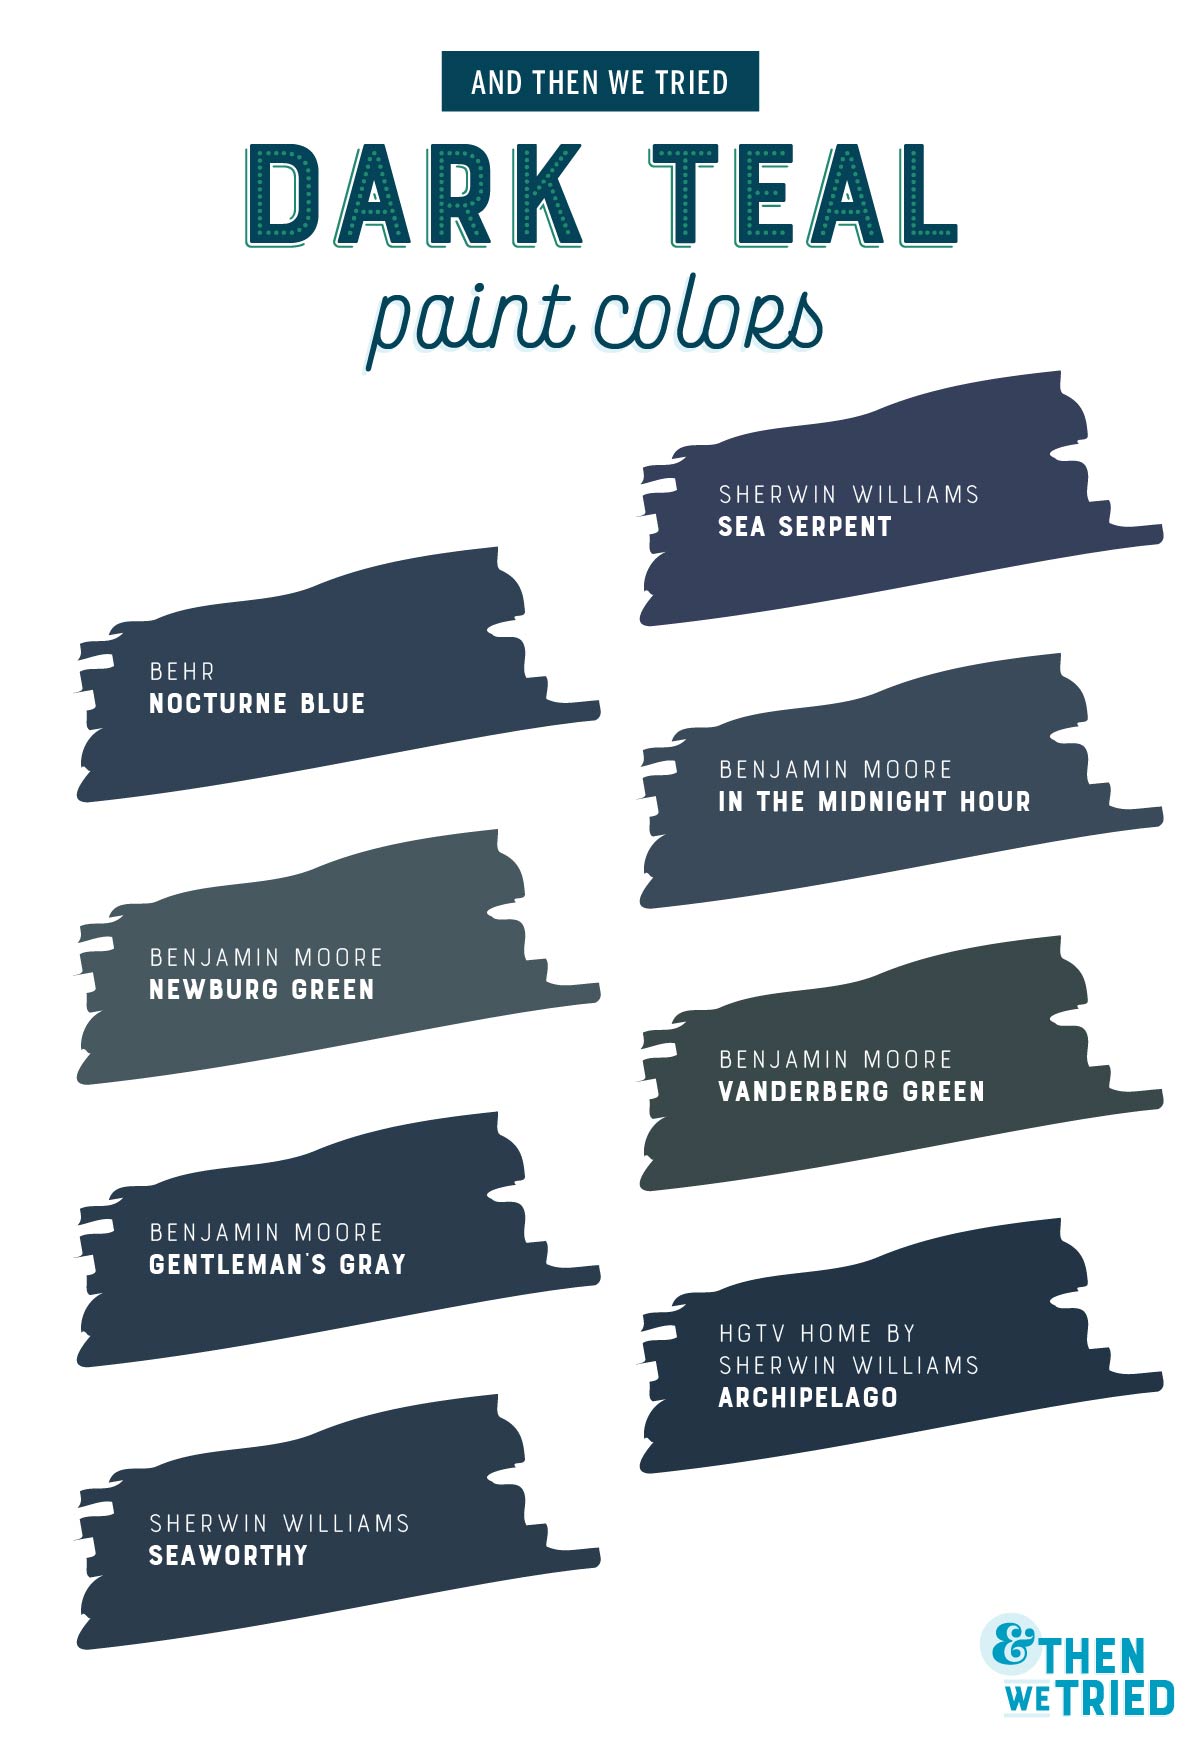 Choosing a dark teal house paint color for exterior siding